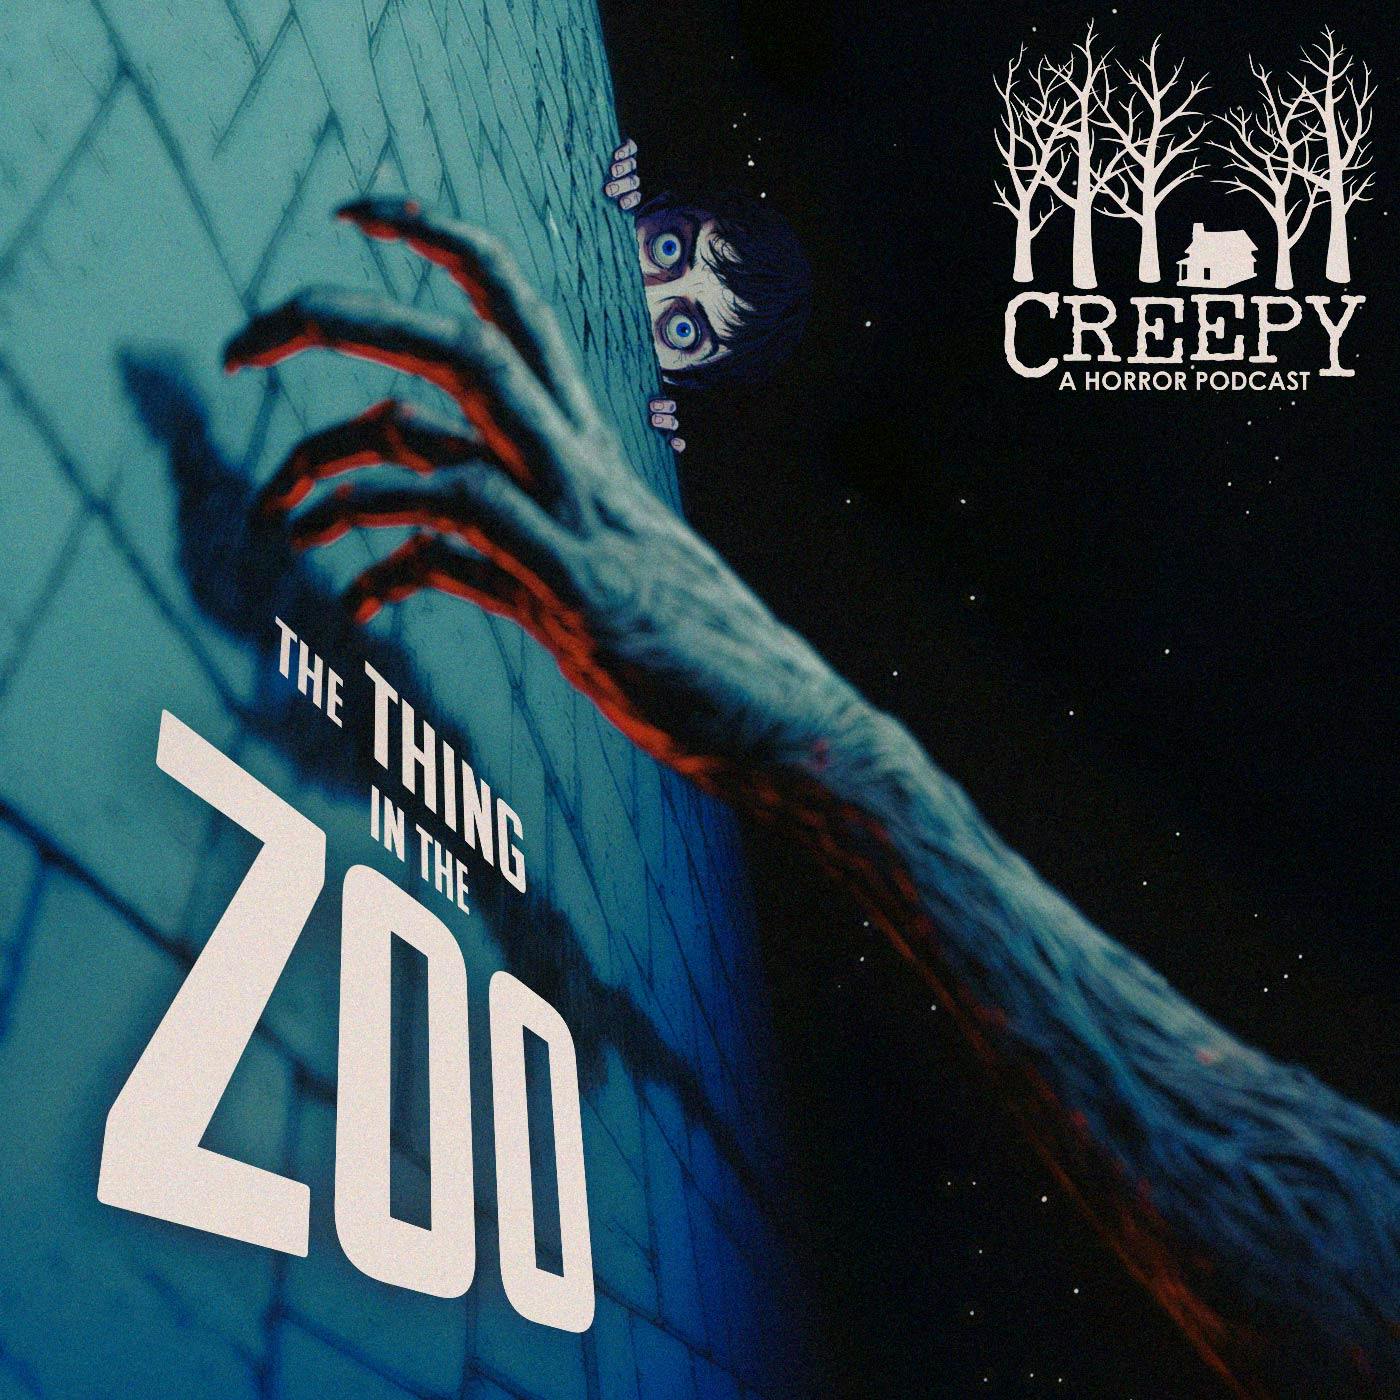 The Thing in the Zoo